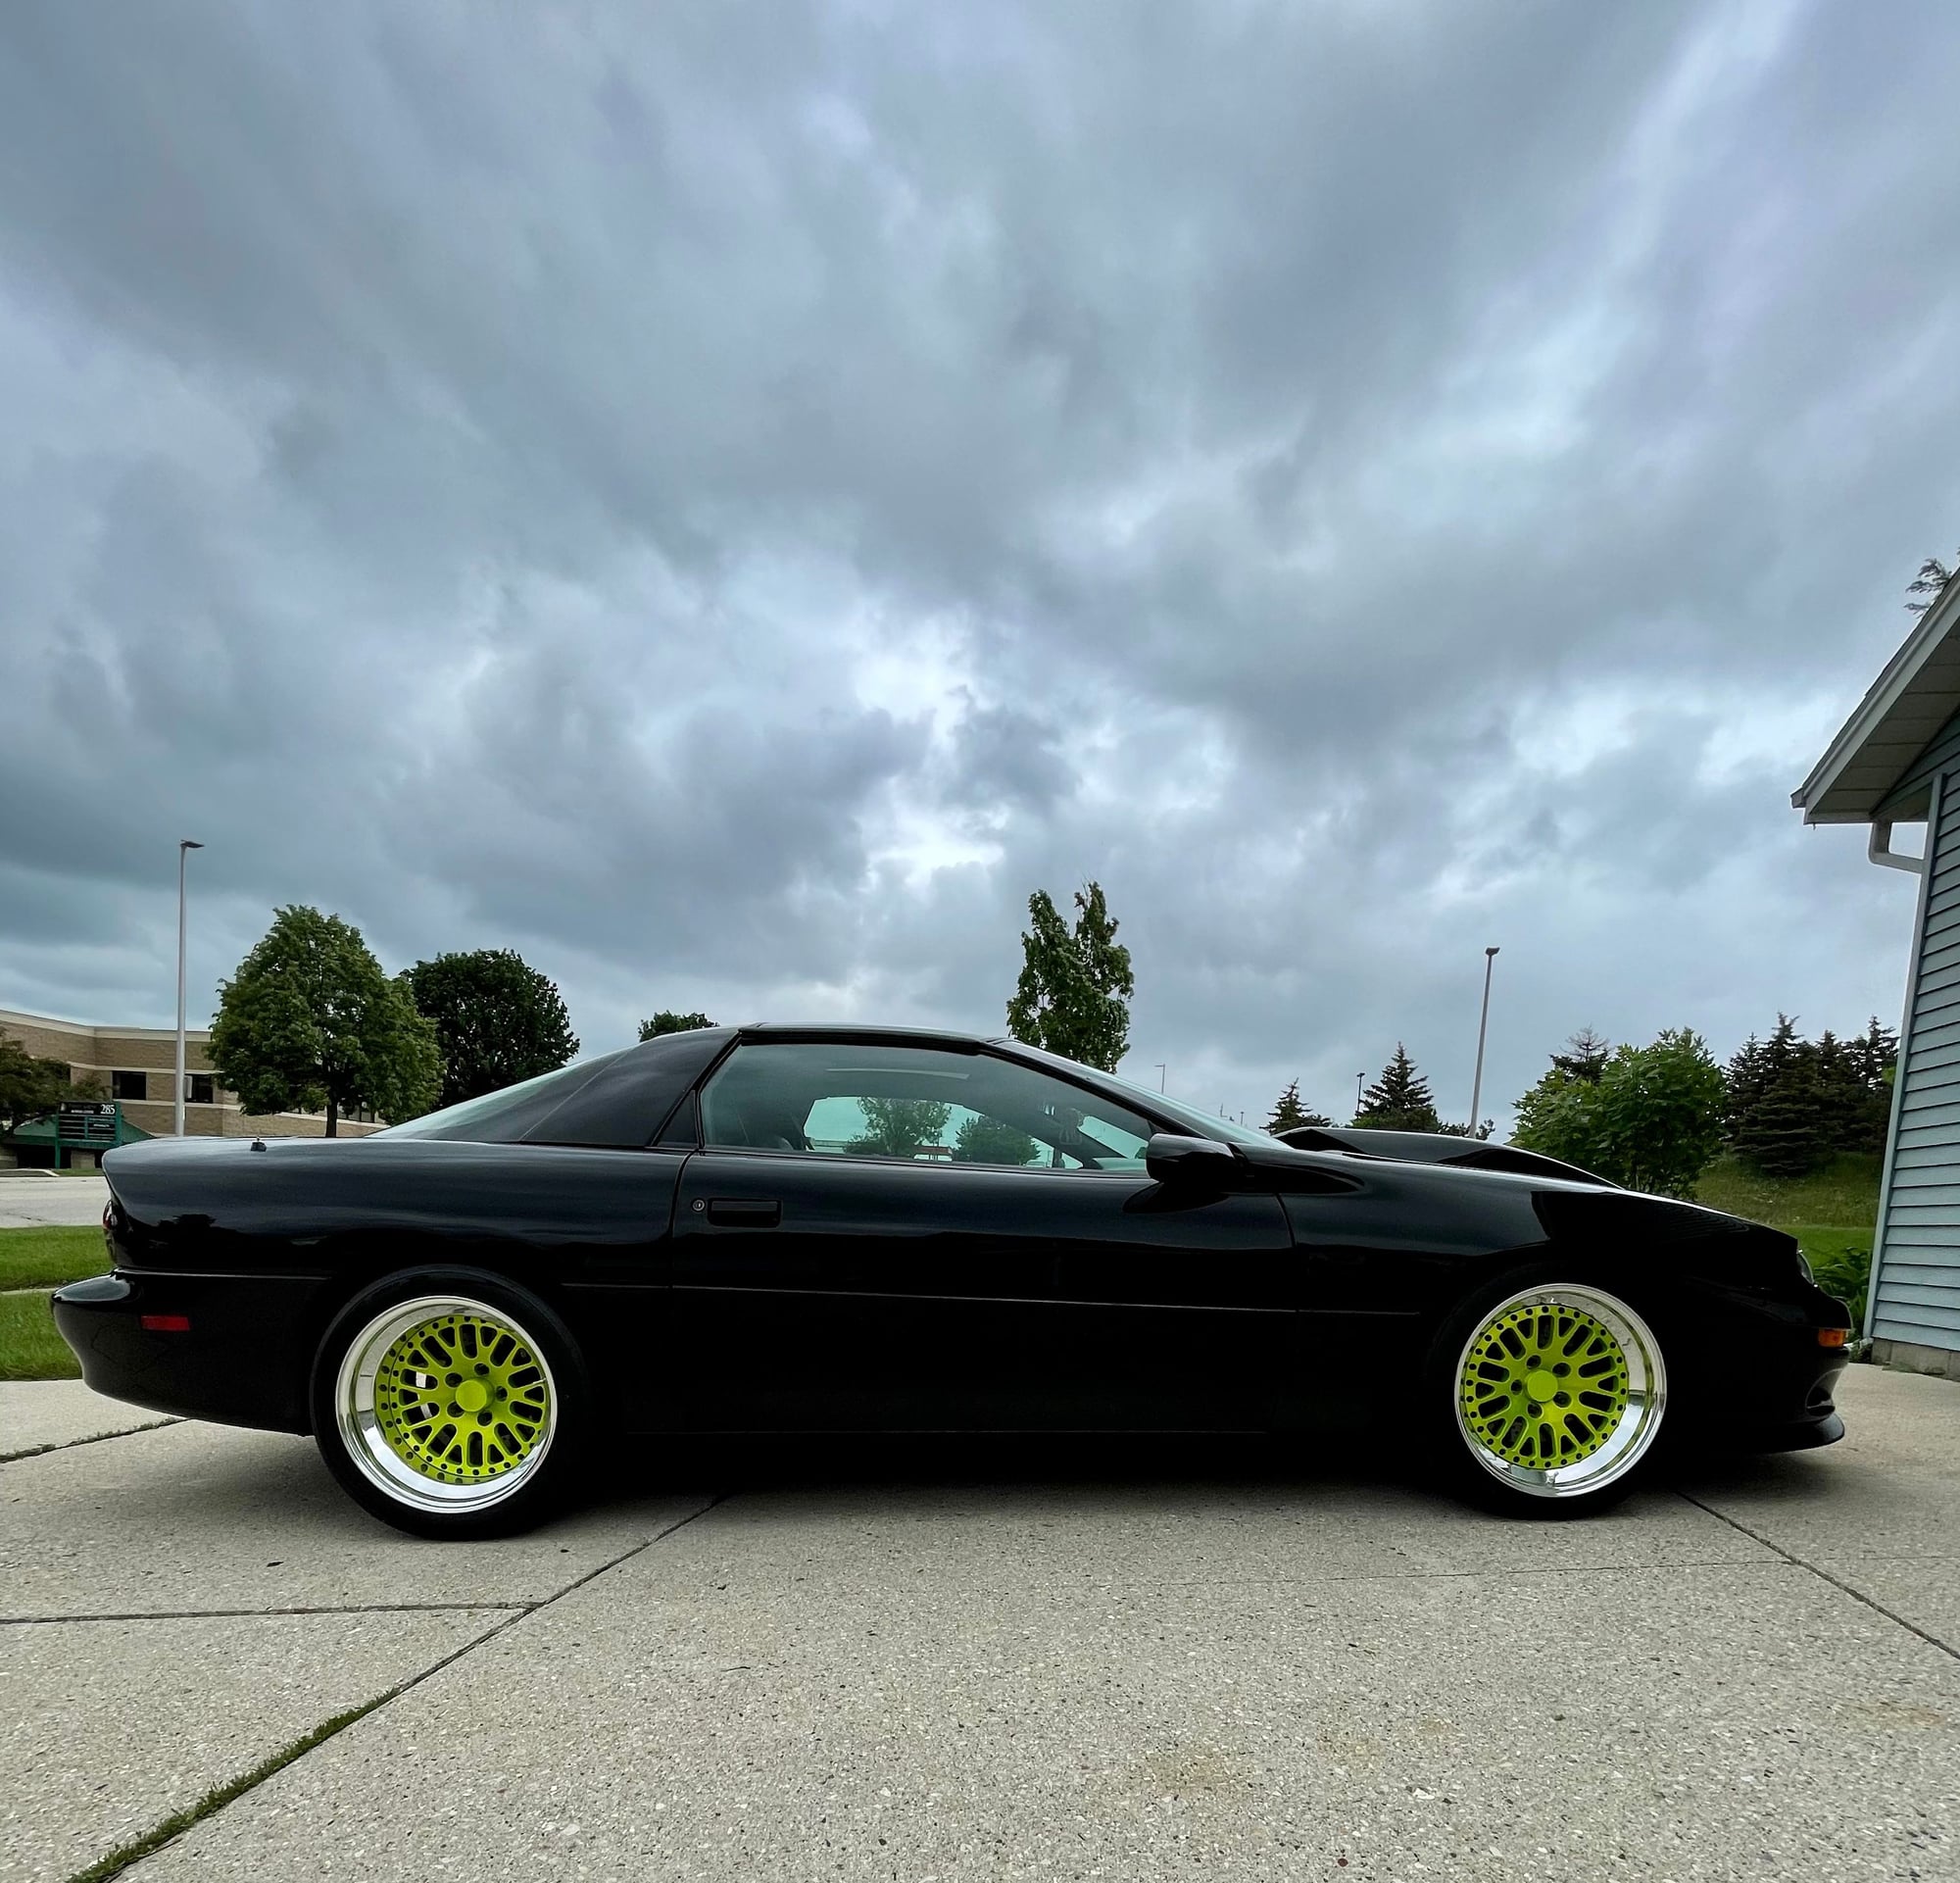 2000 Chevrolet Camaro - 2000 Camaro Ss - Used - VIN 2G1FP22G1Y2146471 - 66,250 Miles - 8 cyl - 2WD - Manual - Coupe - Black - Pewaukee, WI 53072, United States